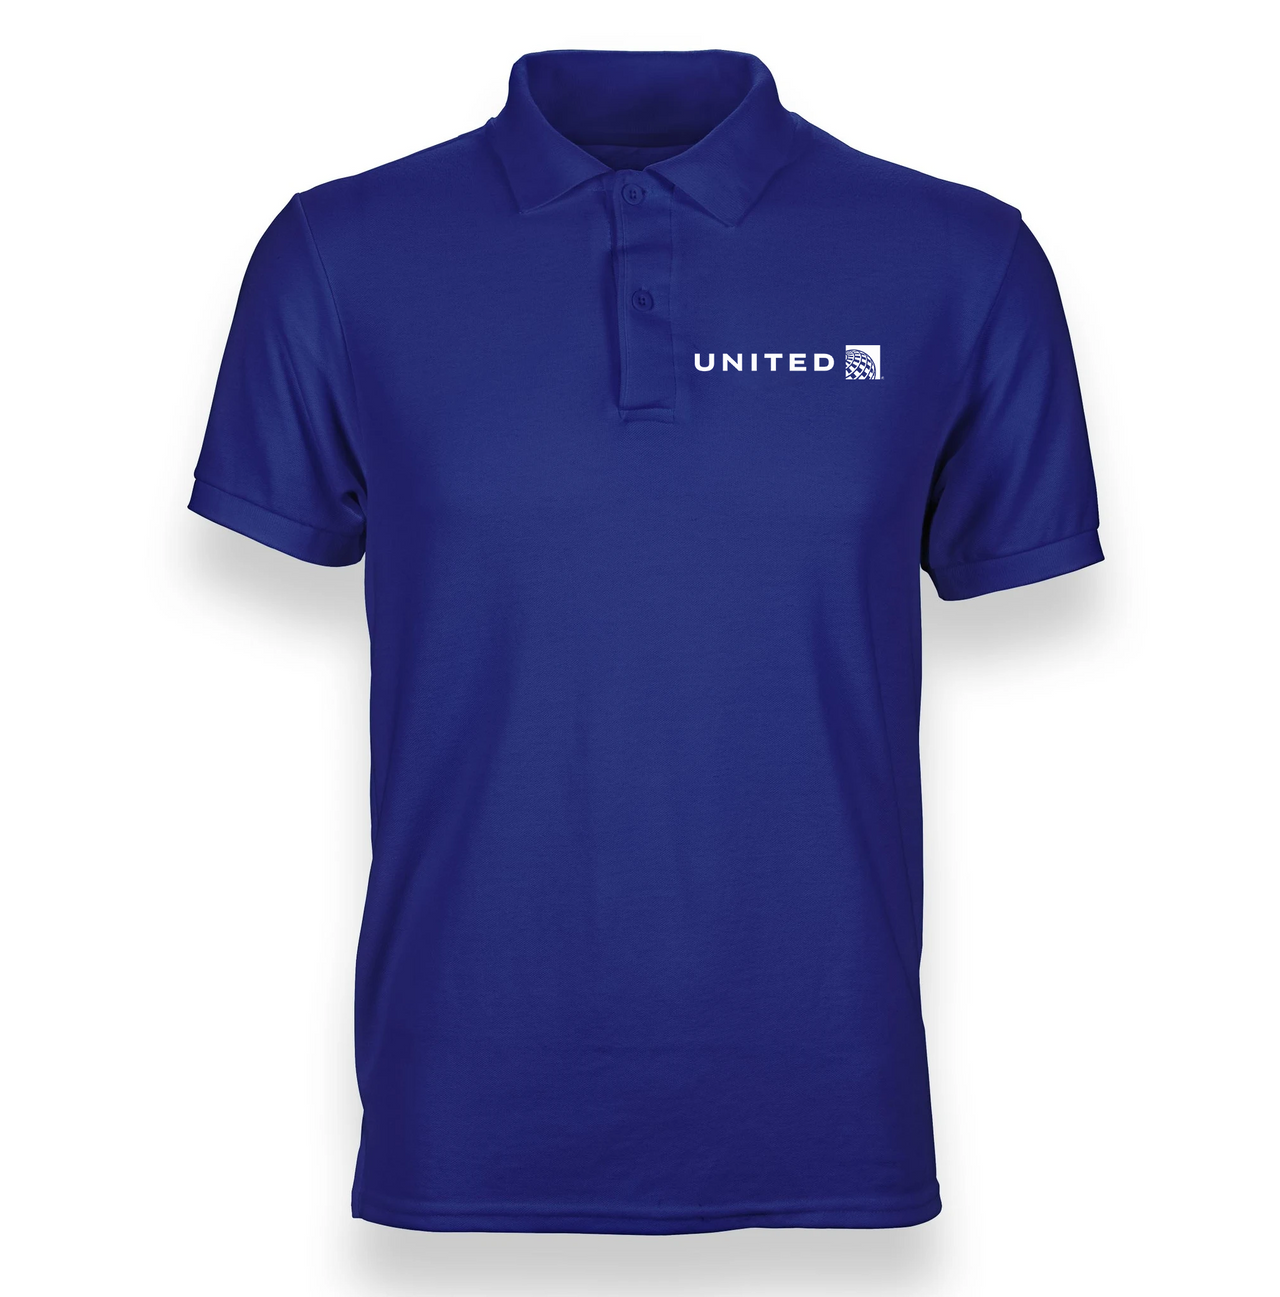 a blue polo shirt with the united logo on it